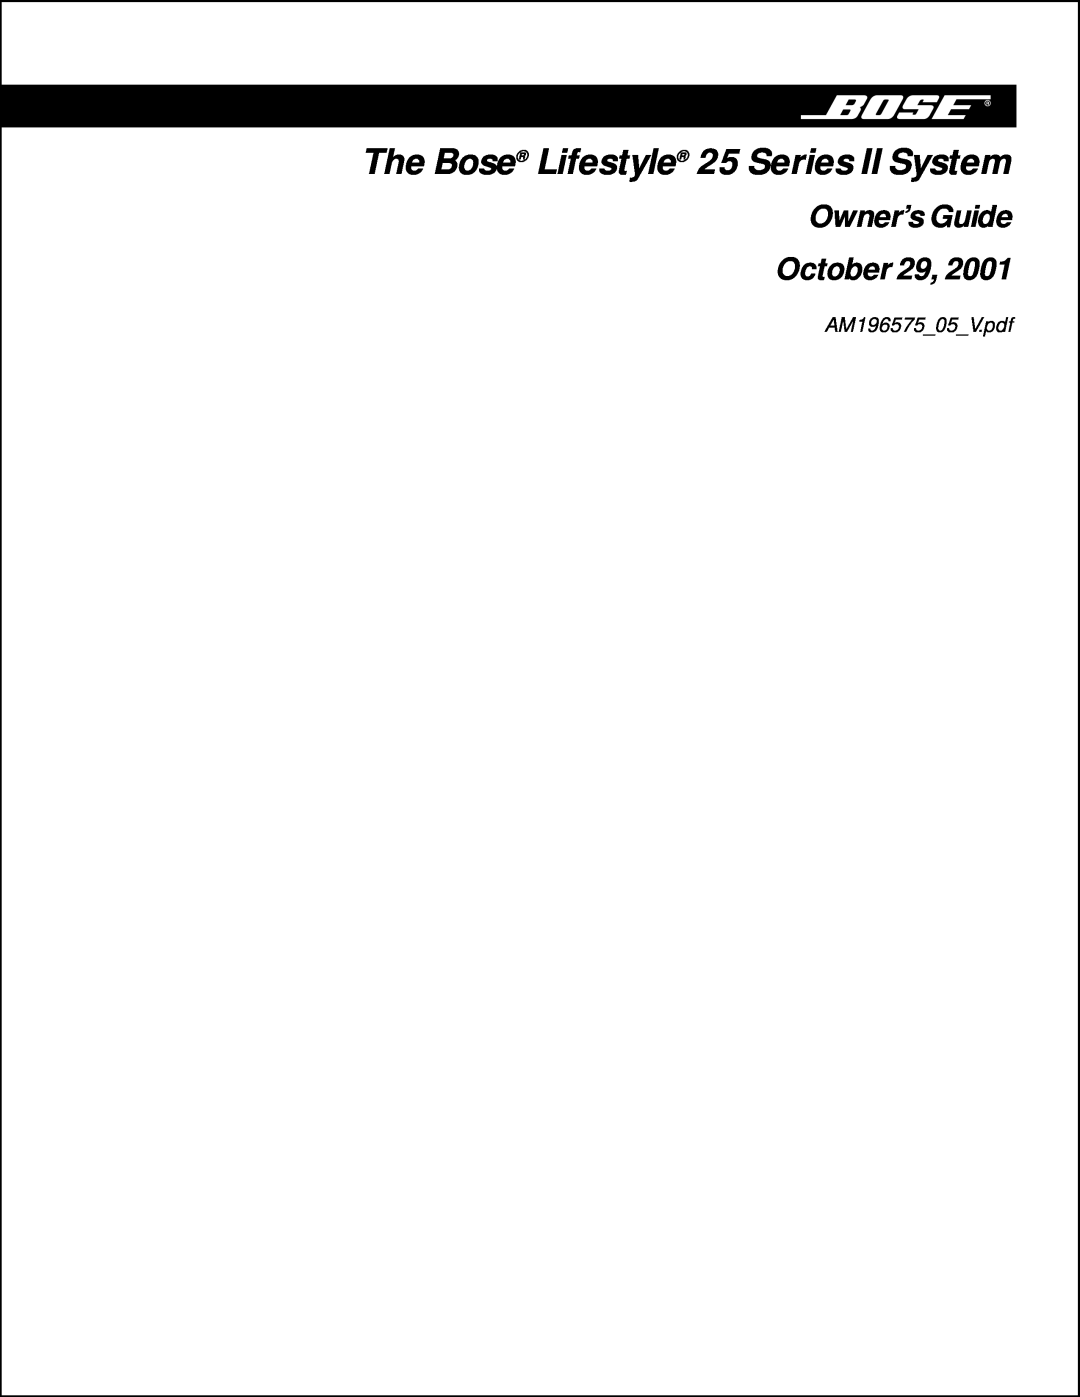 Bose manual The Bose Lifestyle 25 Series II System, Owner’s Guide October 